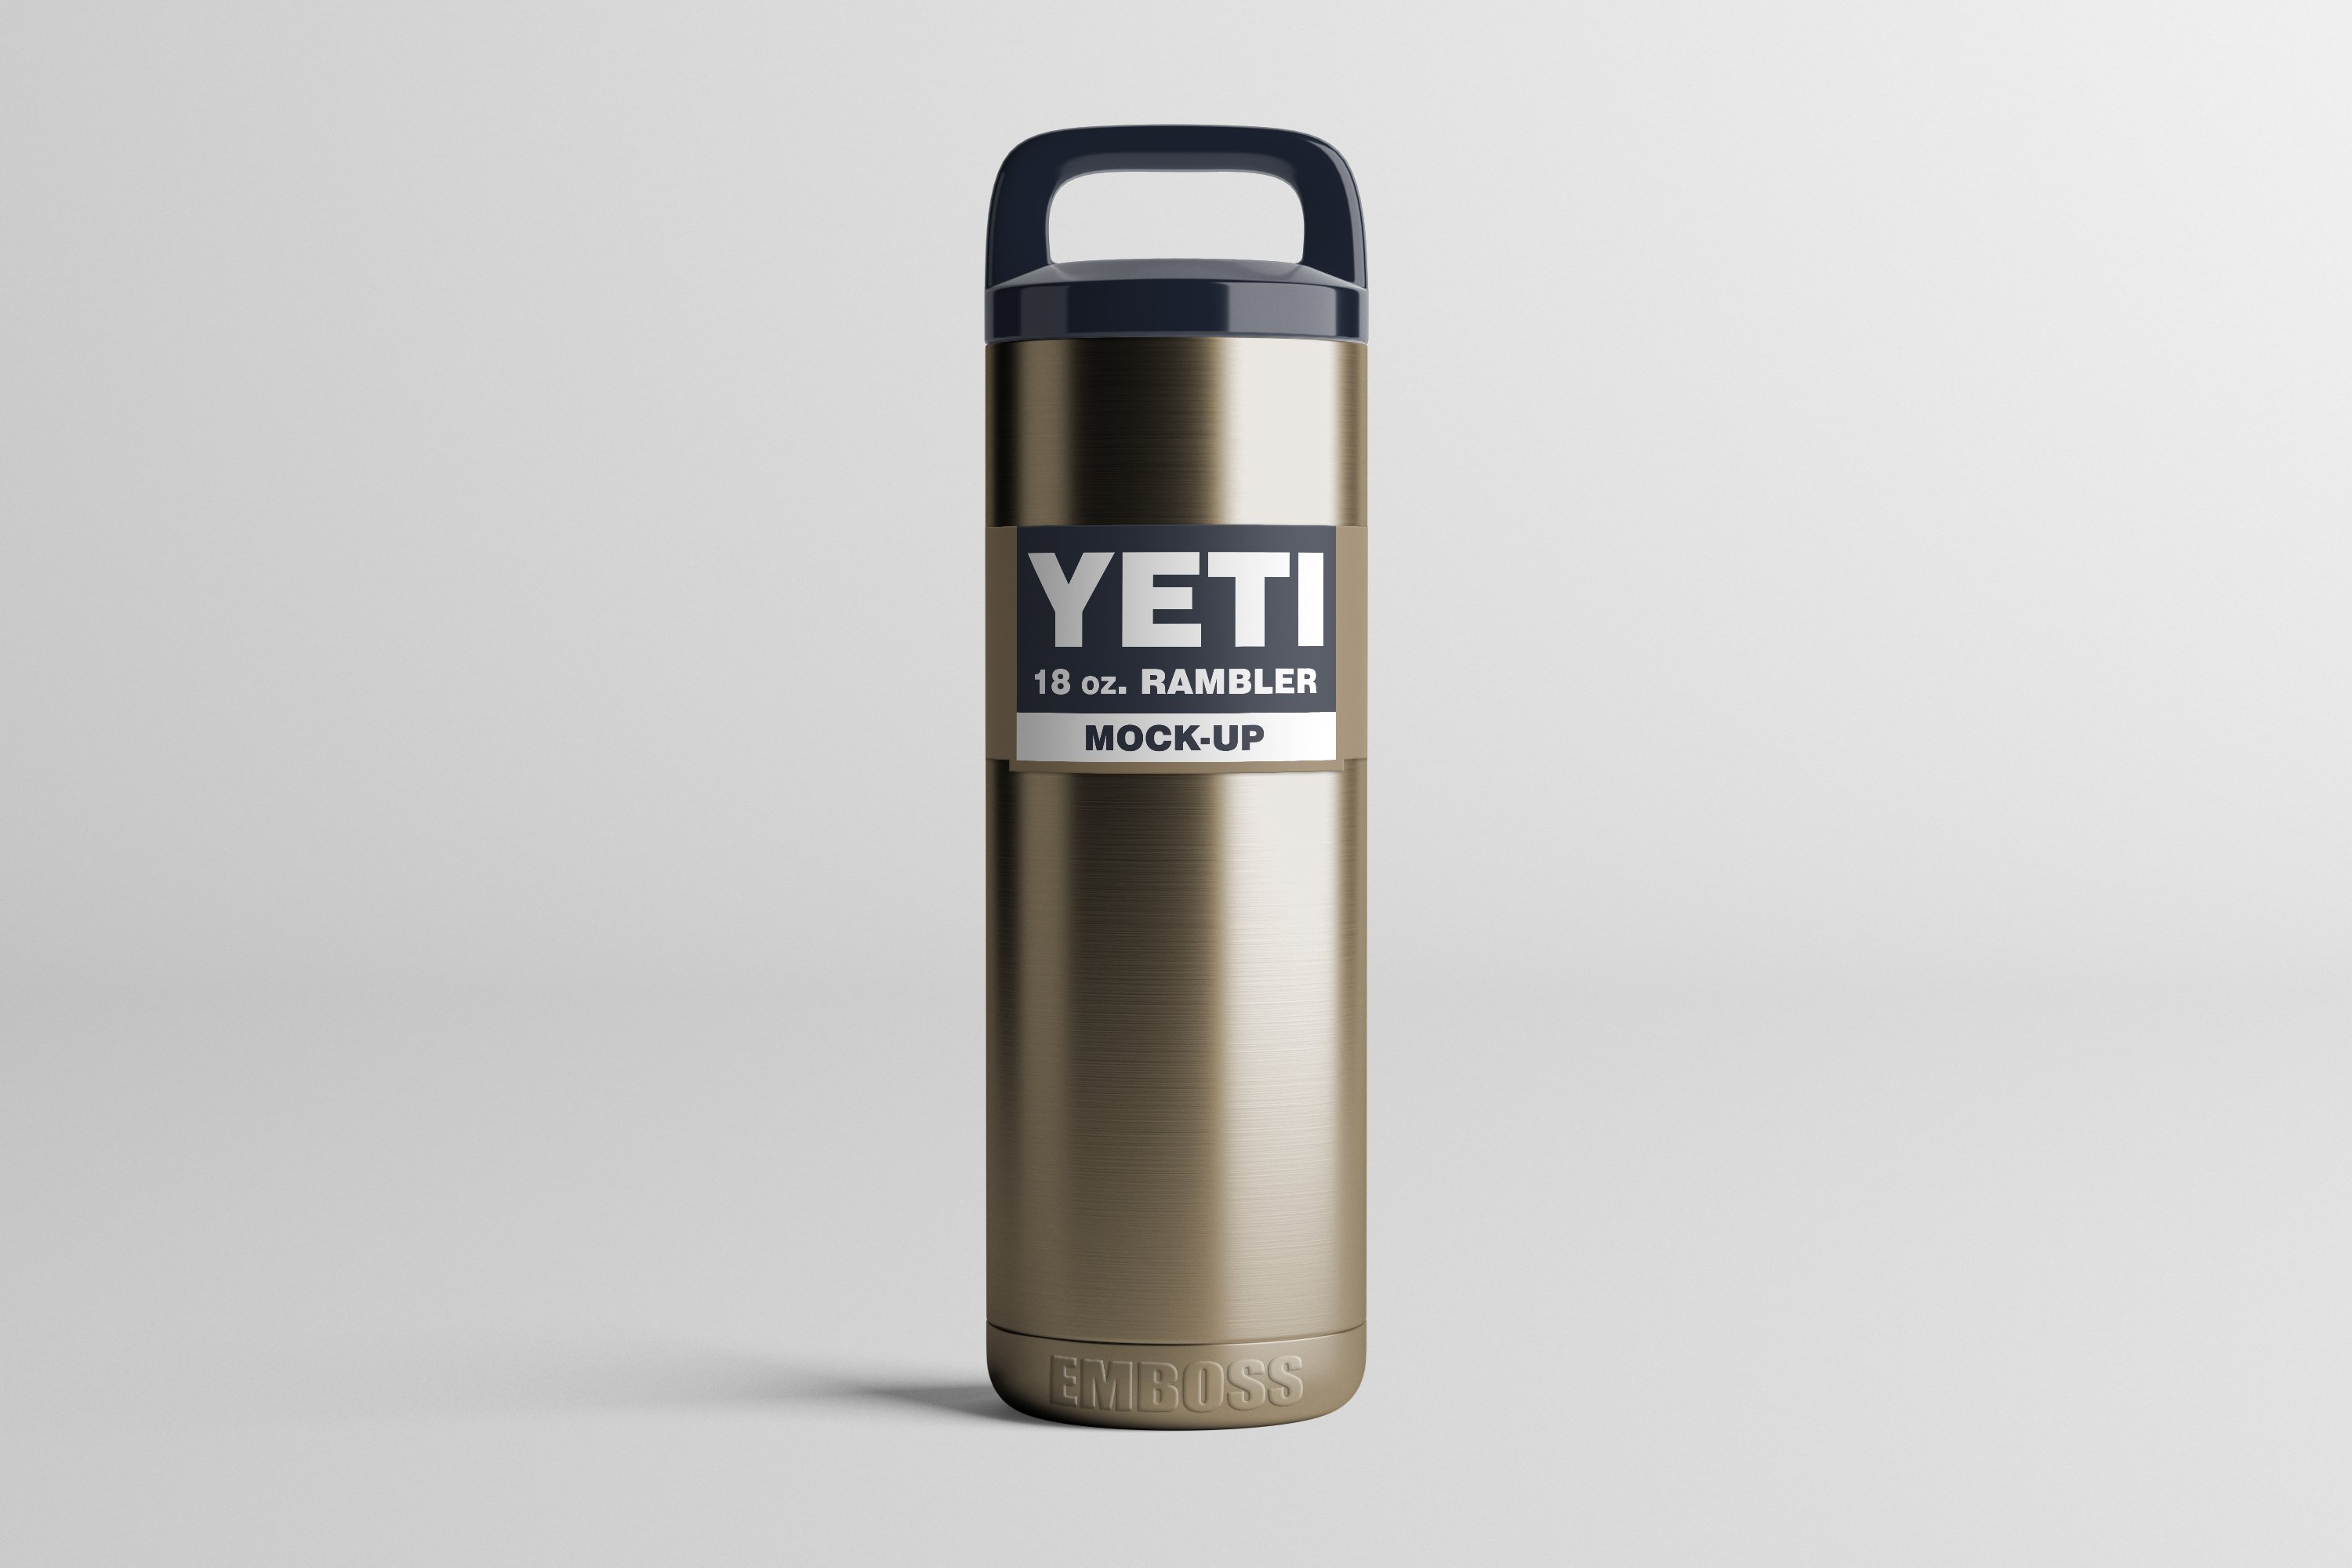 Big metal gold yeti cup for adventures.